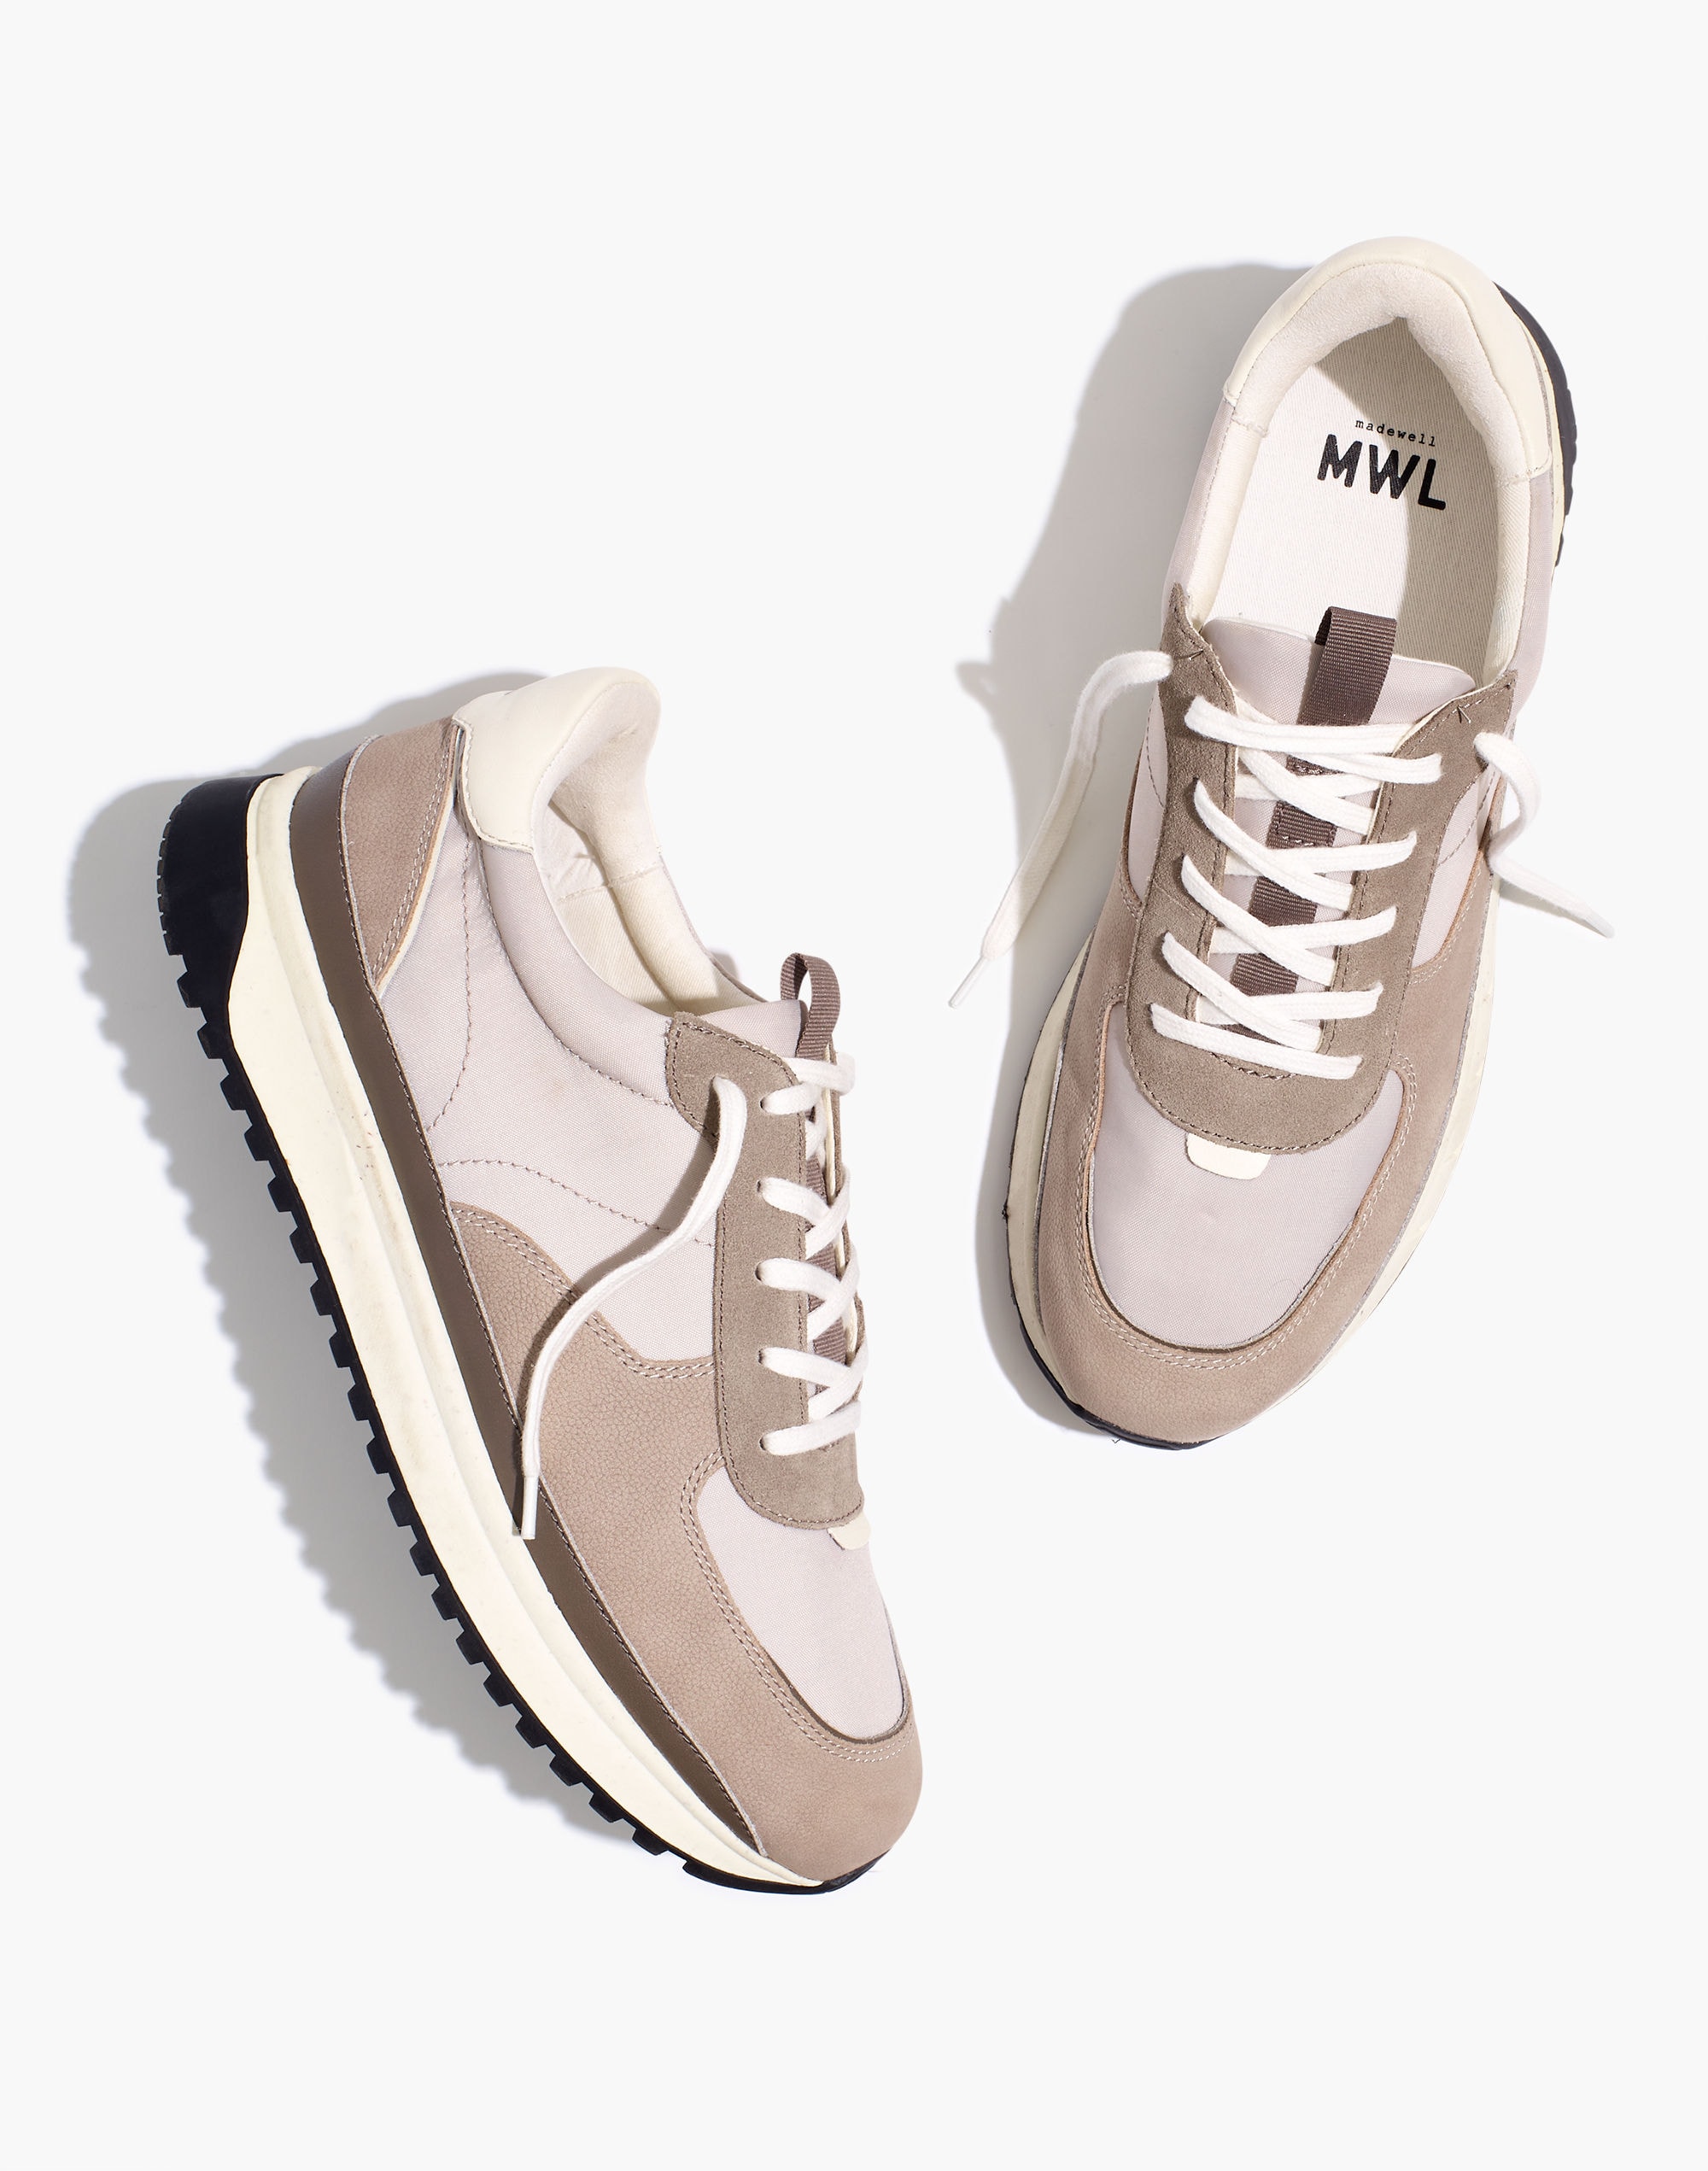 Madewell Kickoff Trainer Sneakers in Neutral Colorblock Leather - Size 5-M